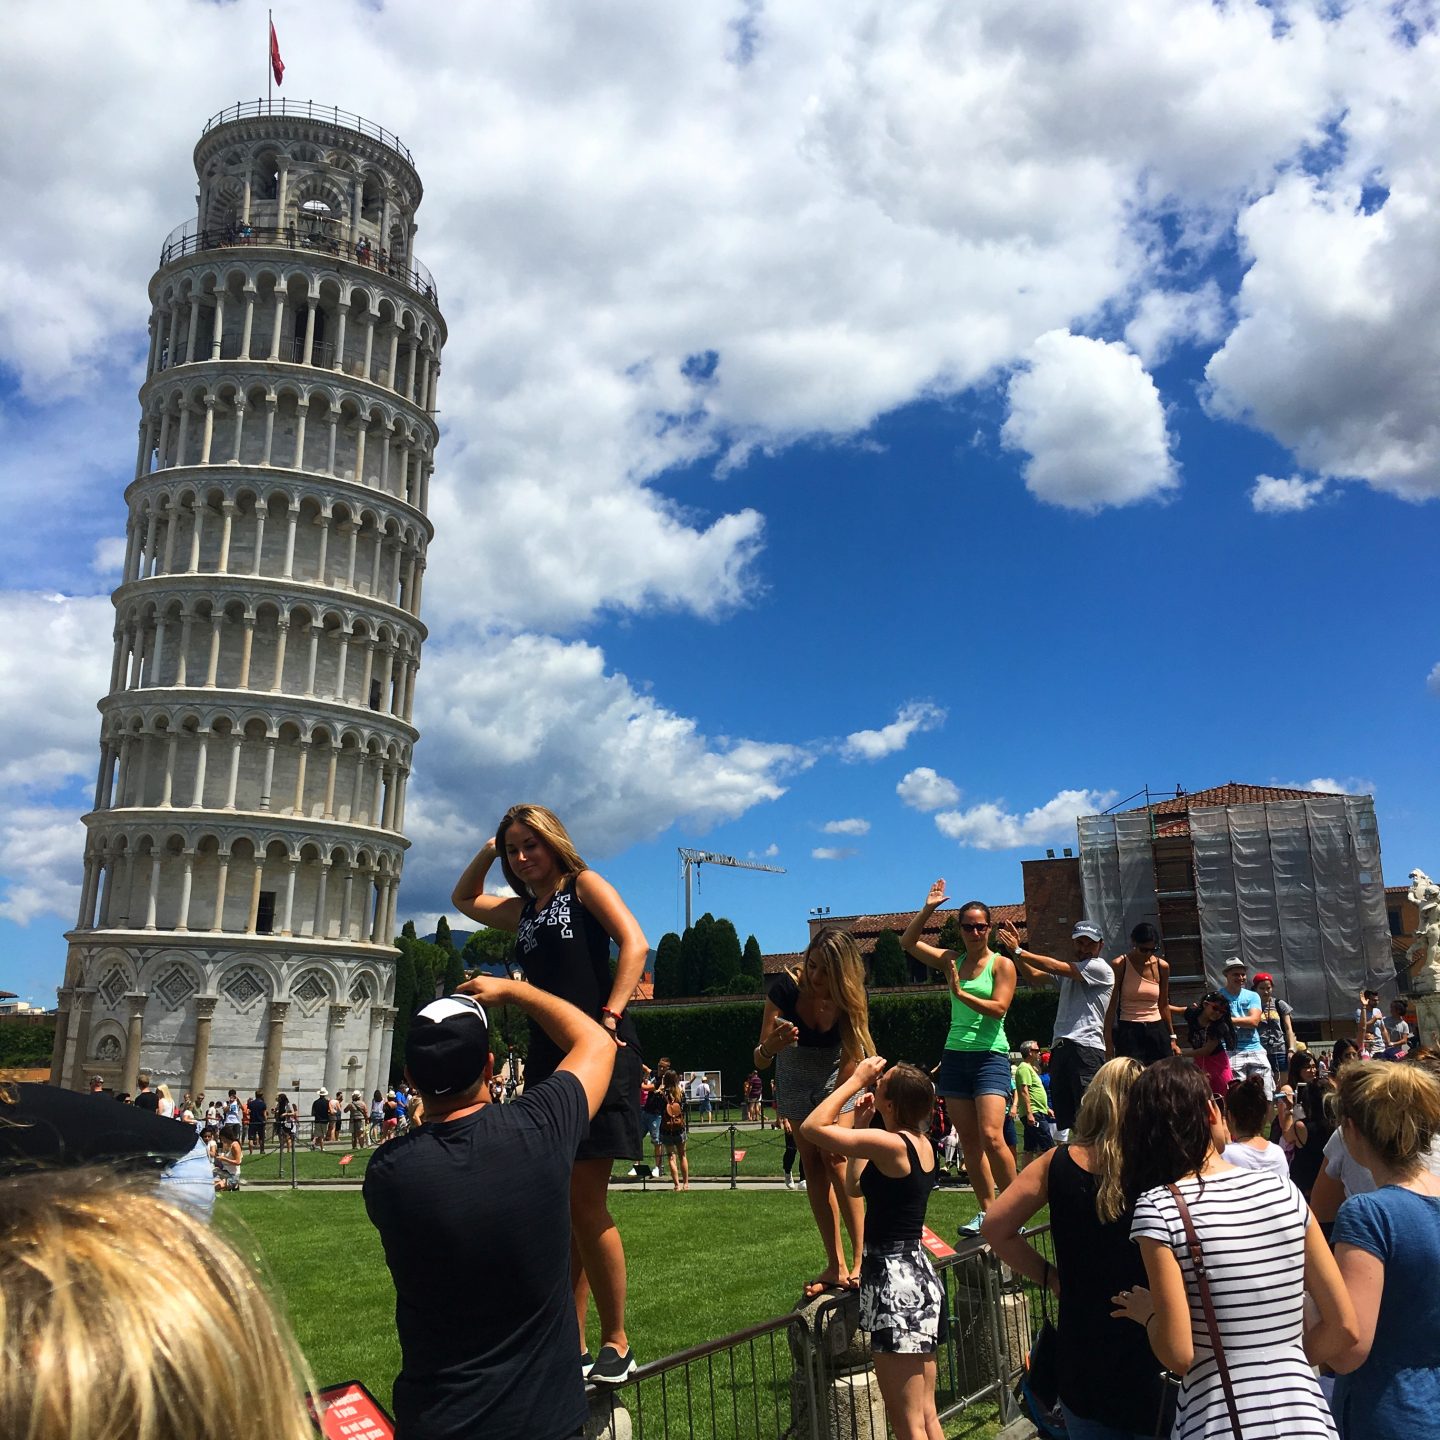 leaning-tower